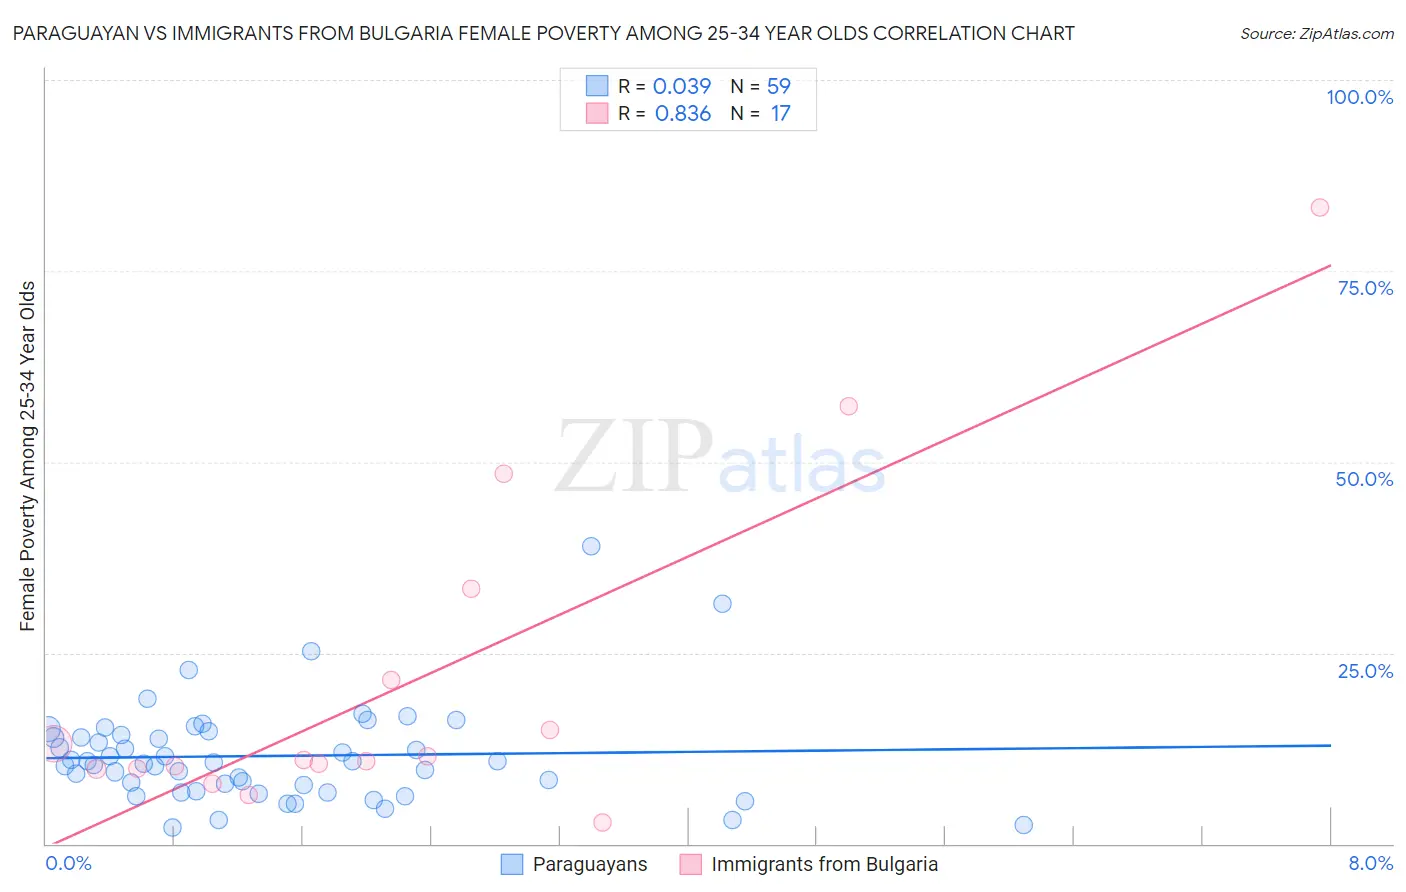 Paraguayan vs Immigrants from Bulgaria Female Poverty Among 25-34 Year Olds